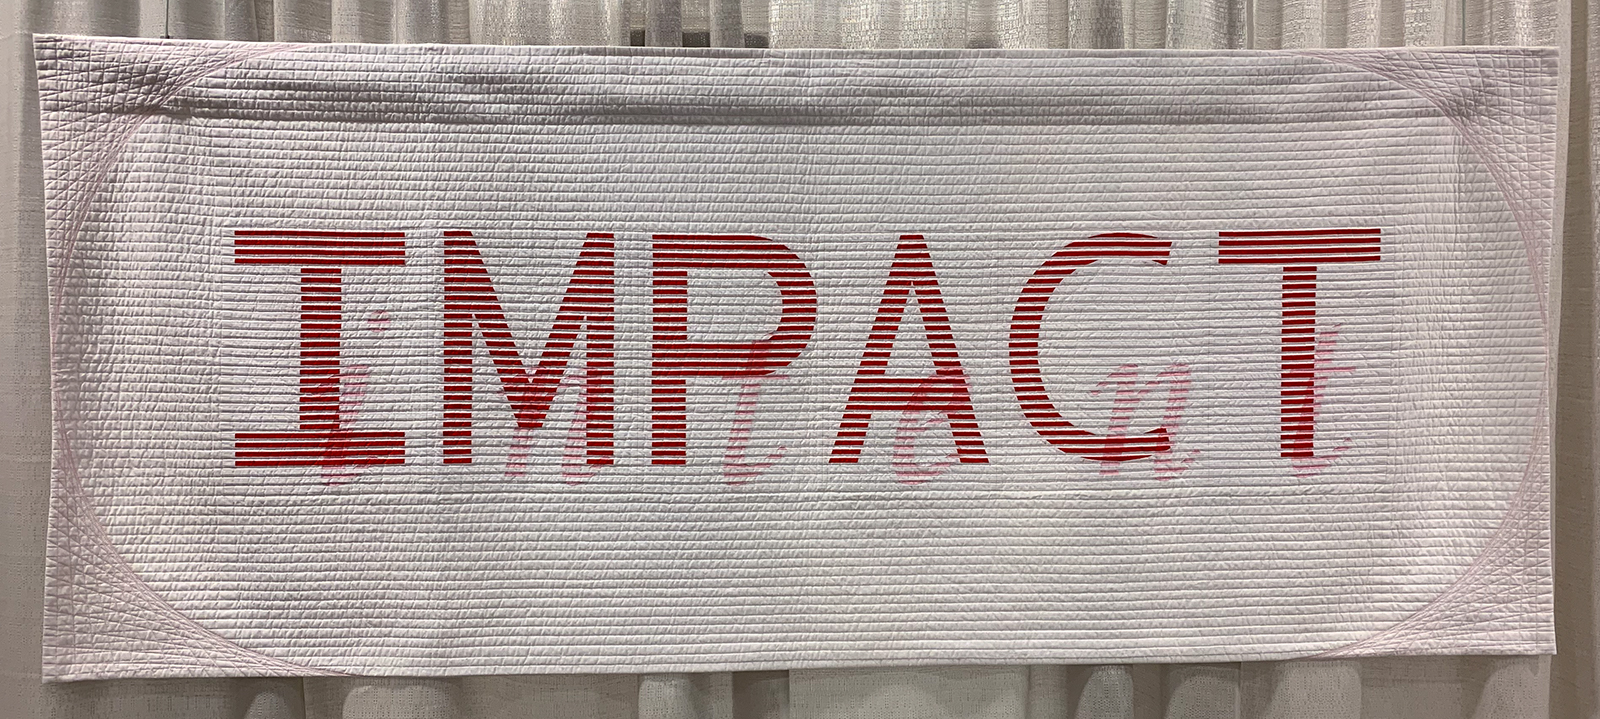 Modern Quilt pieced with tiny strips intertwined to spell out Impact in large letters and Intent in small letters. 